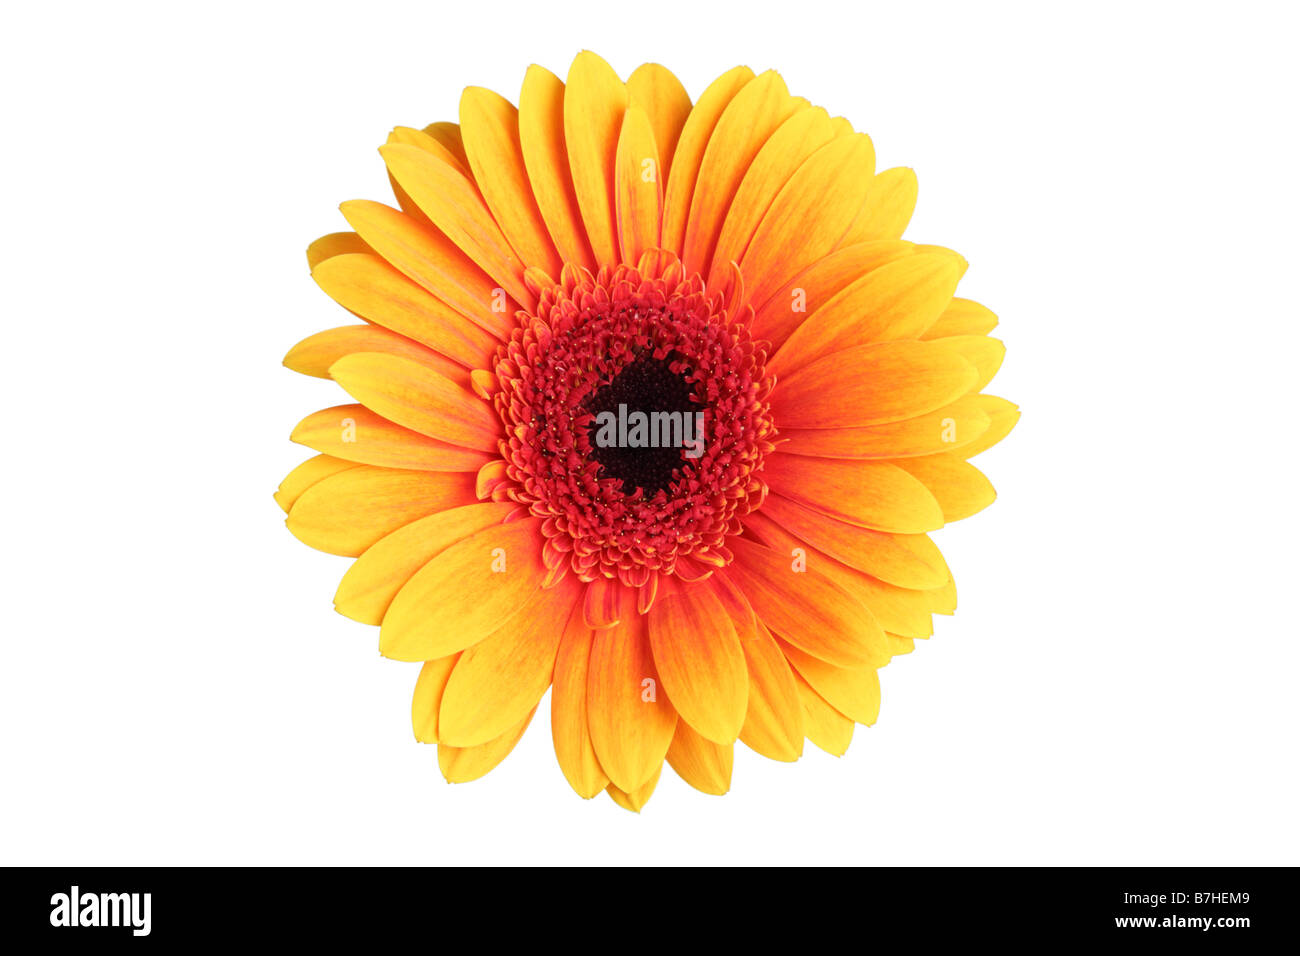 Orange gerber daisy cut out on white background Stock Photo